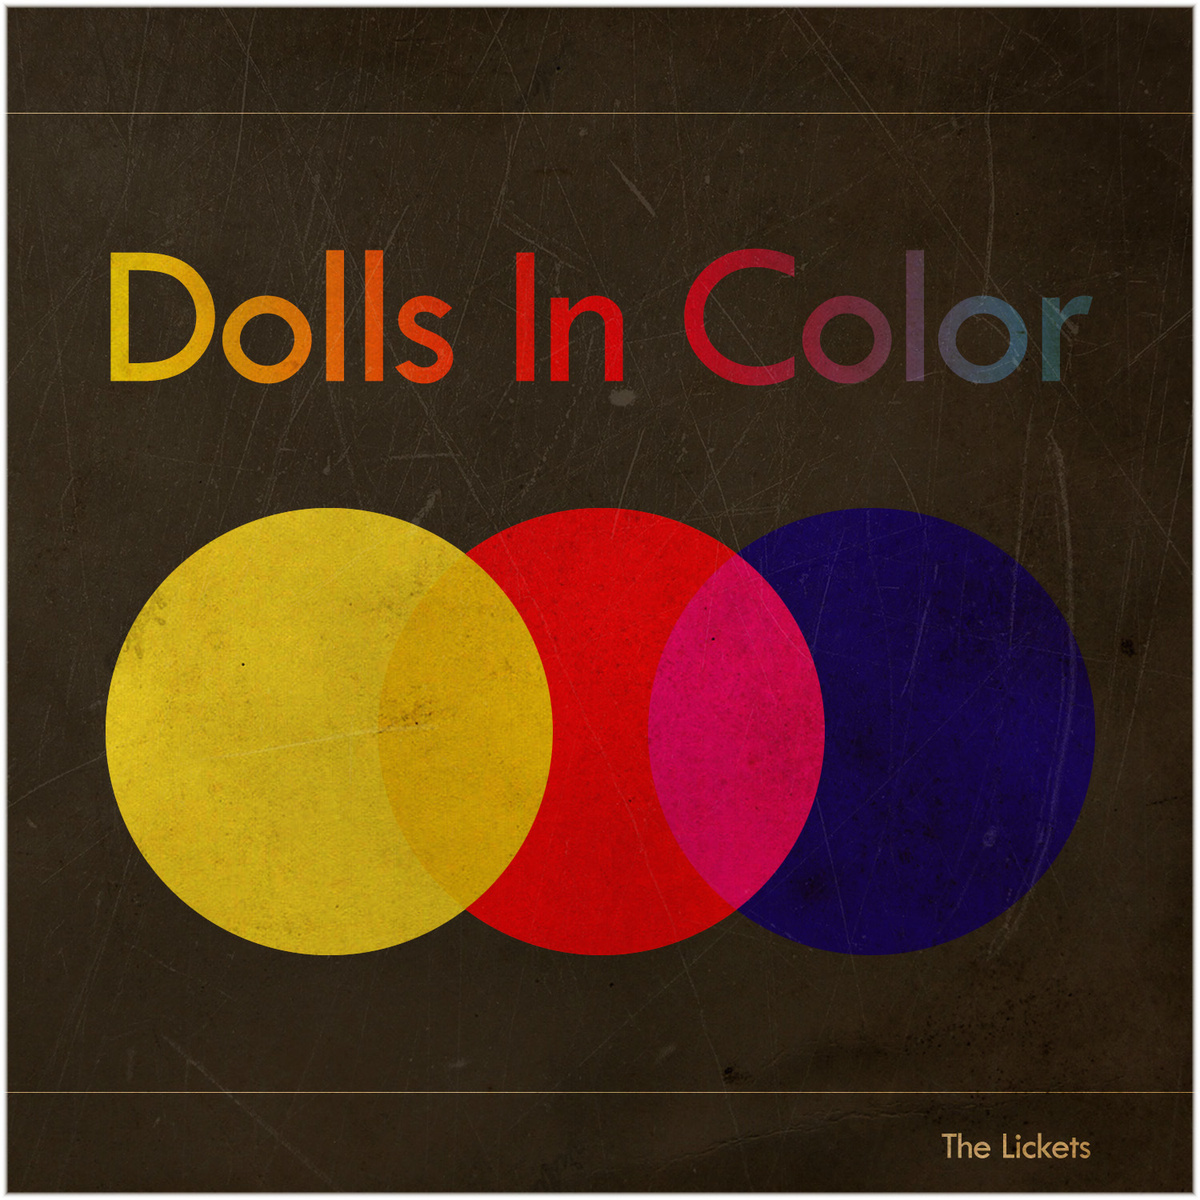 Bandcamp pick of the week: The Lickets - Dolls in Color